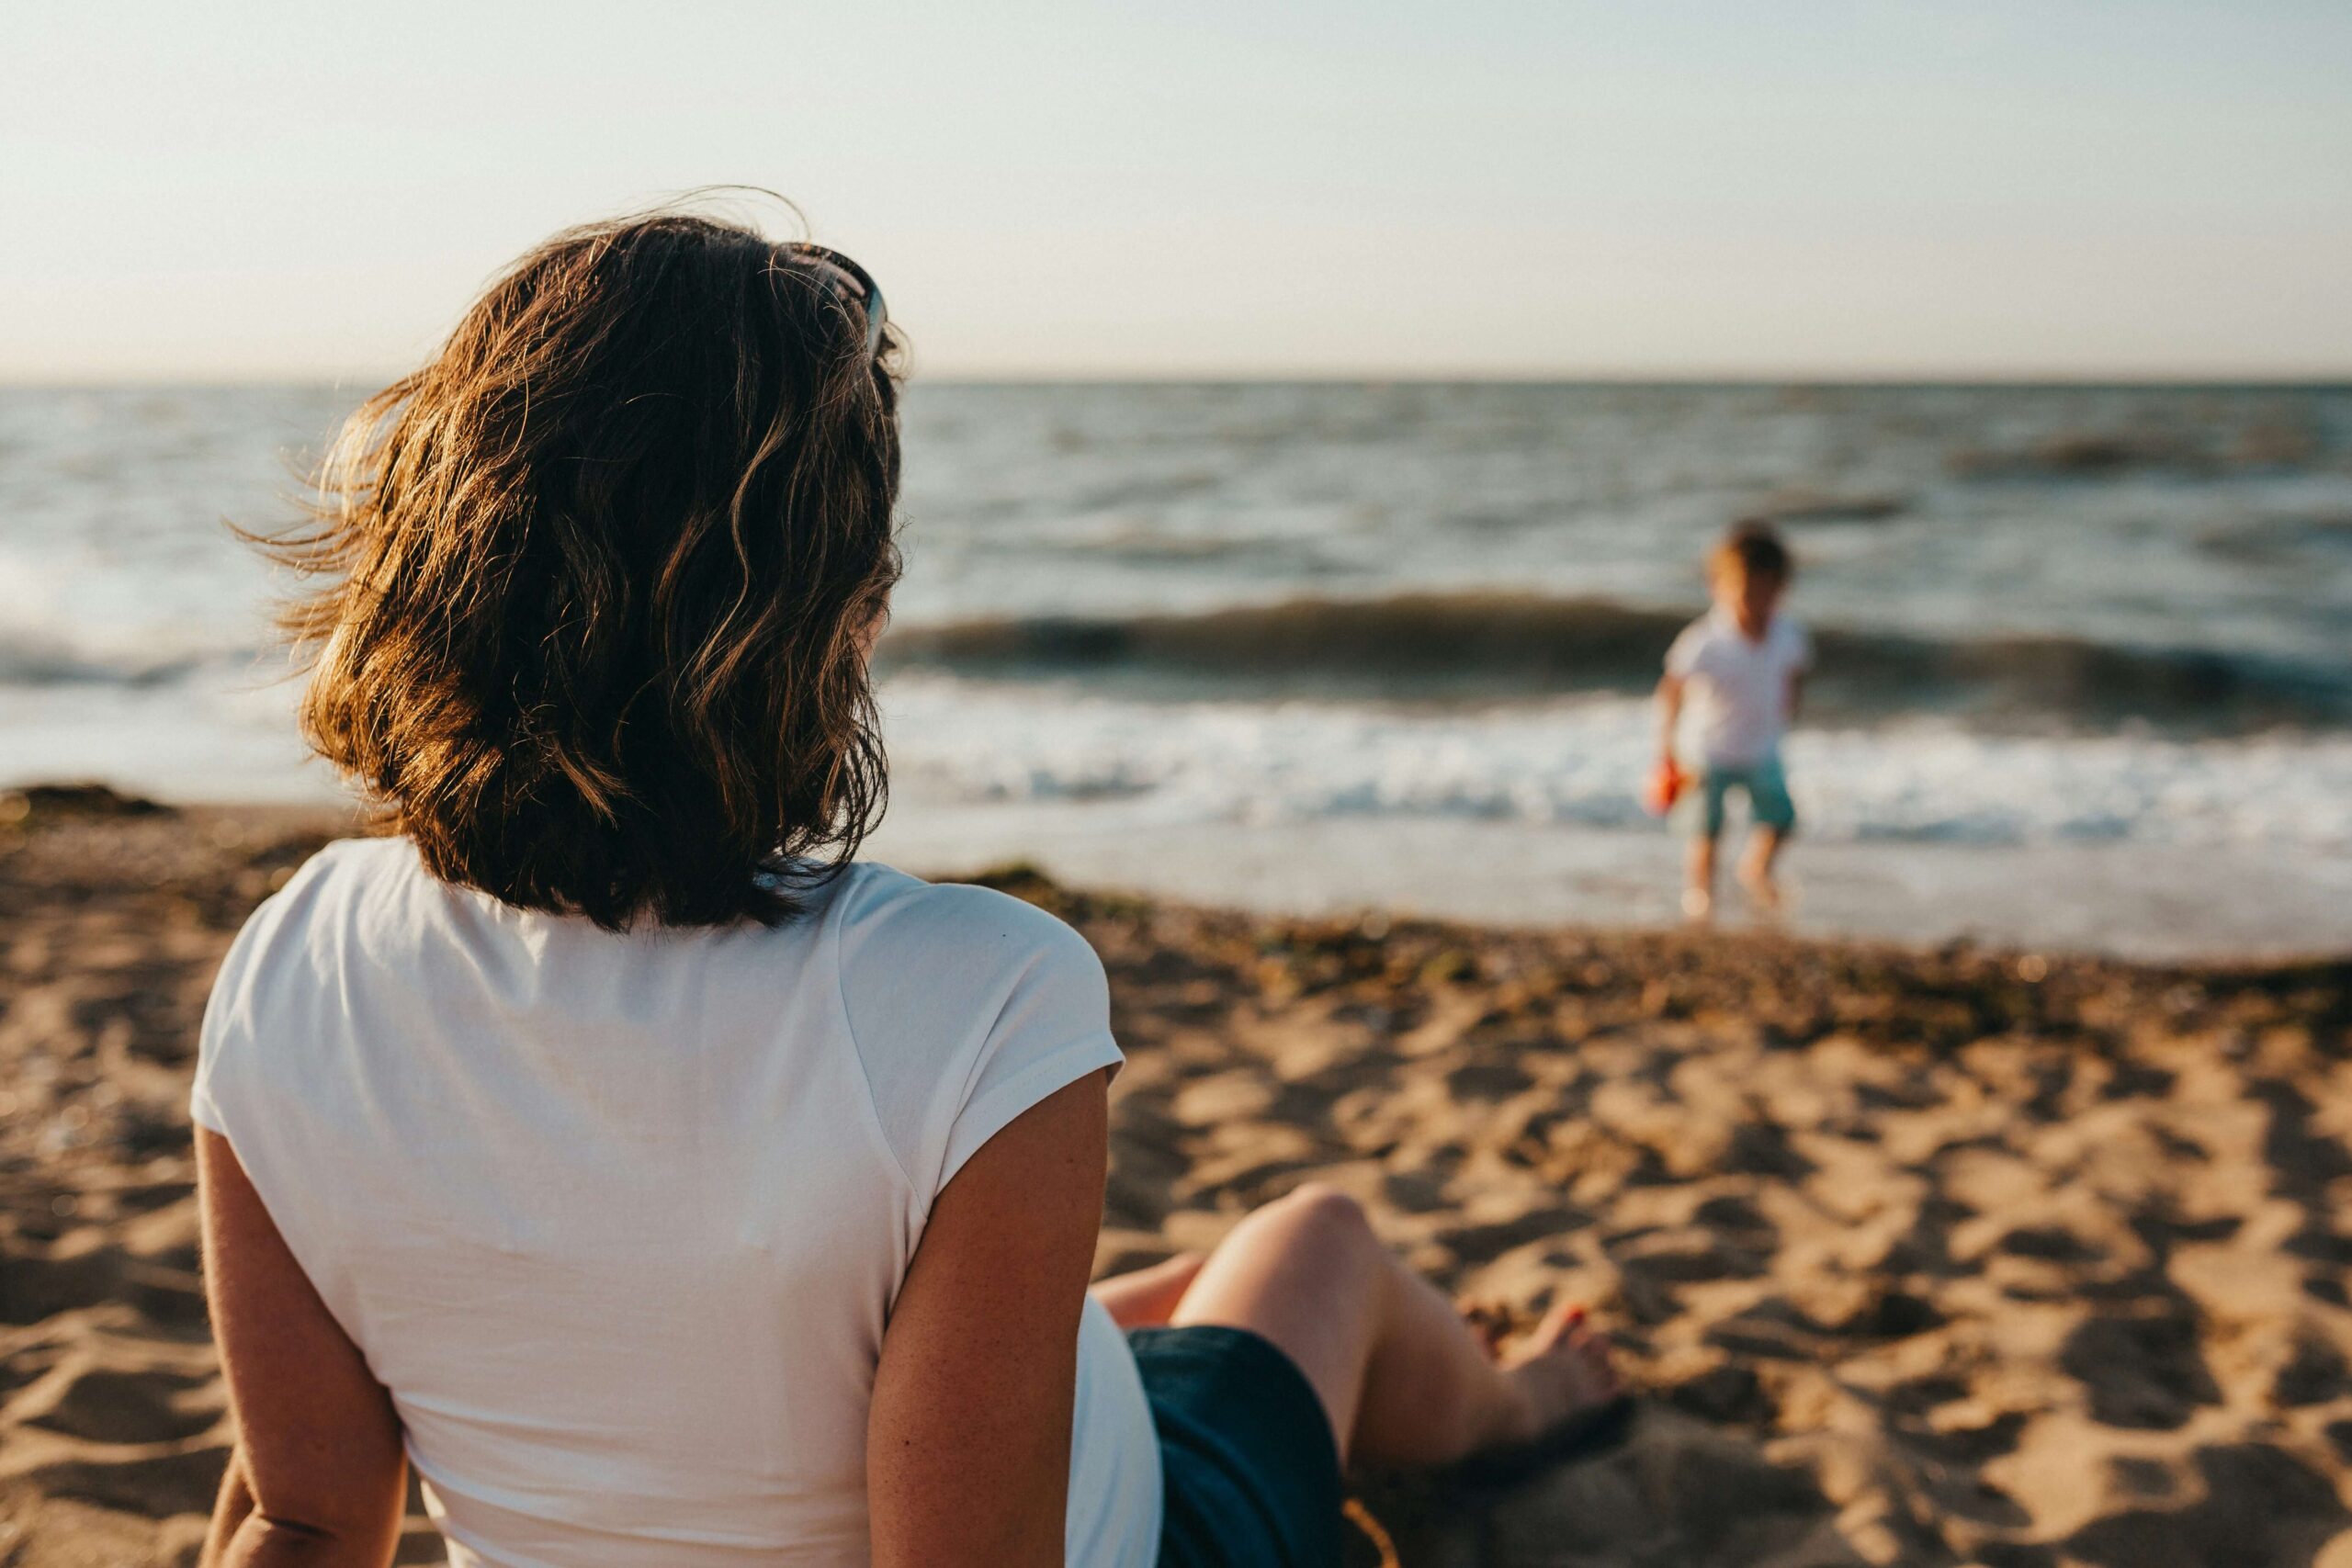 Image of a calm woman sitting on the beach looking at her child playing by the ocean while the sun sets. if you are learning to cope with the loss of a loved, one, discover how grief counseling in Saint. Petersburg, FL can help provide support.